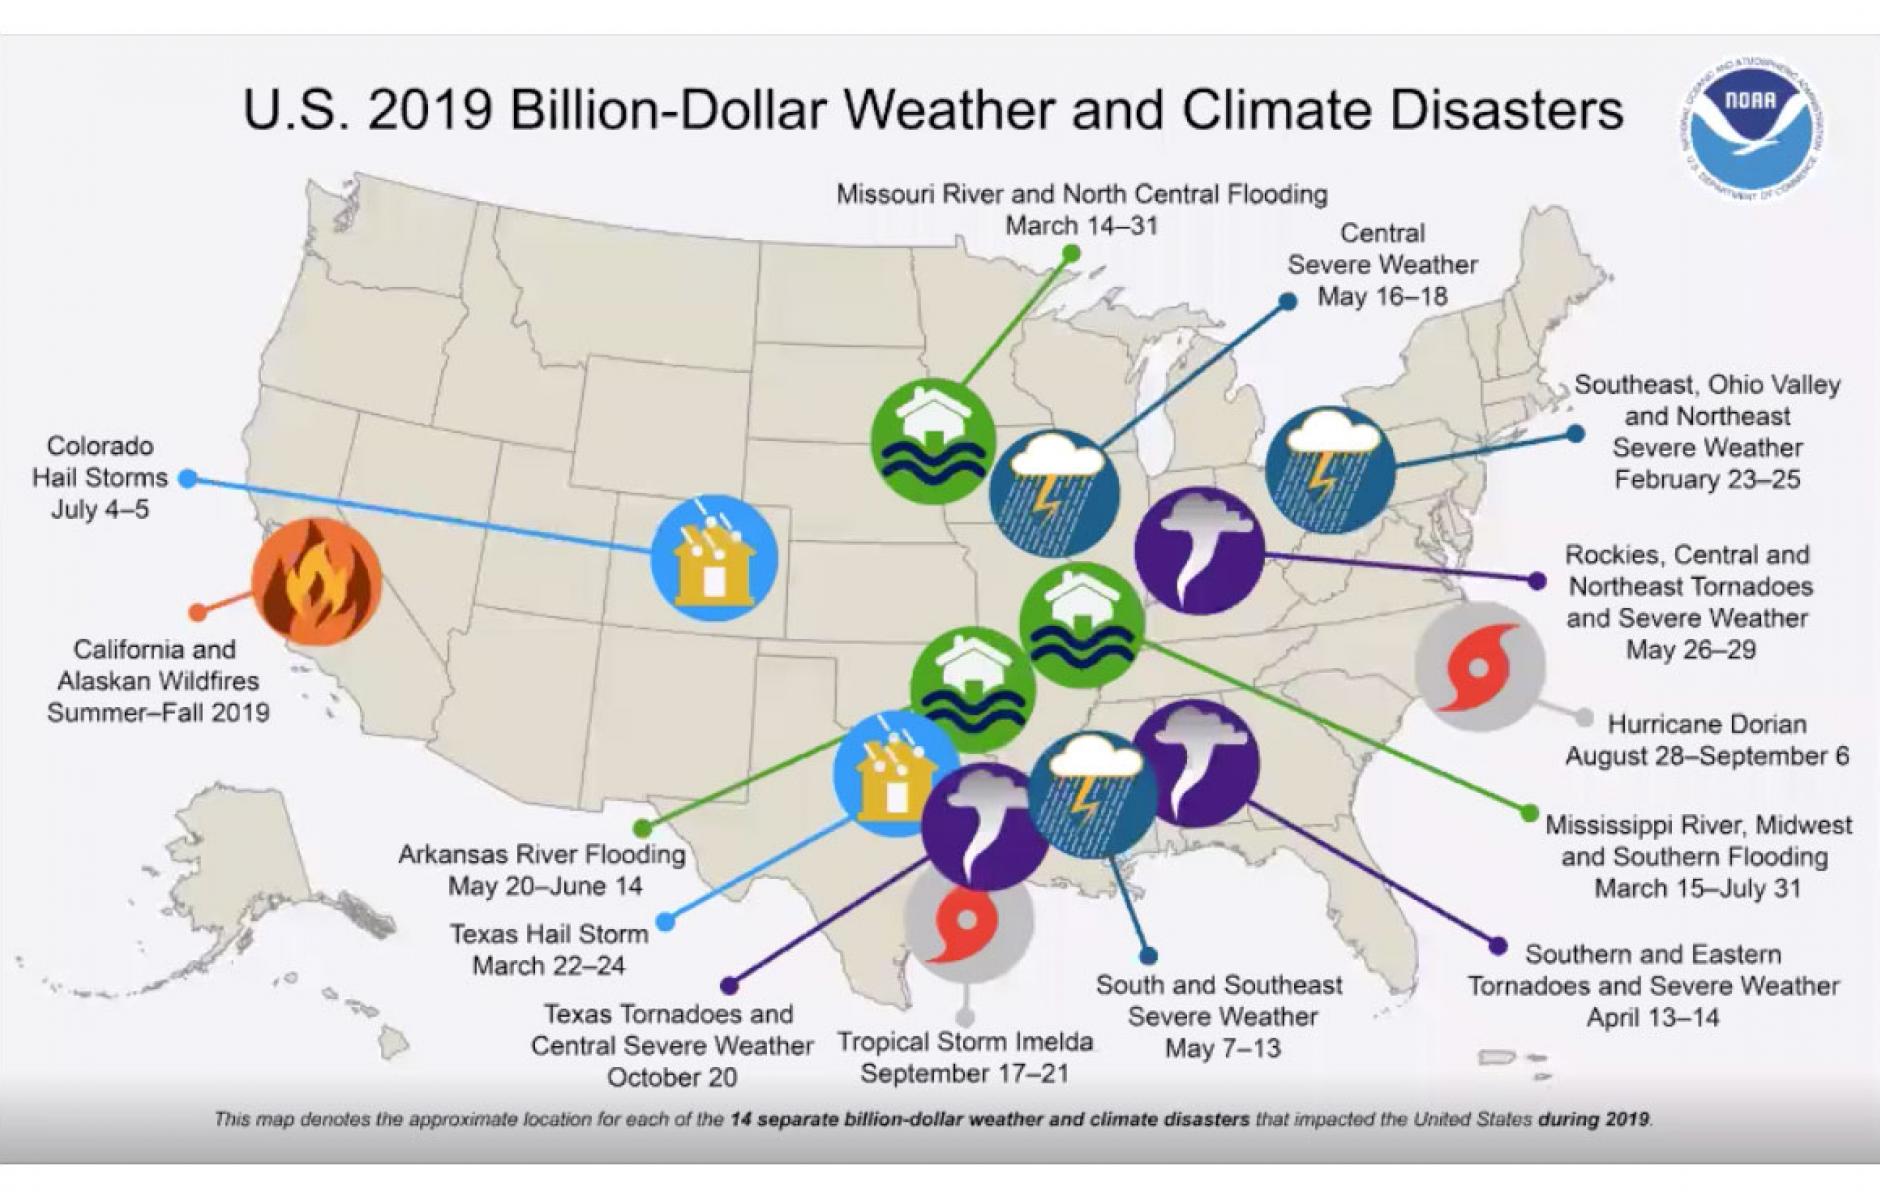 This map denotes the approximate location for each of the 14 separate billion-dollar weather and climate disasters that impacted the United States in 2019.